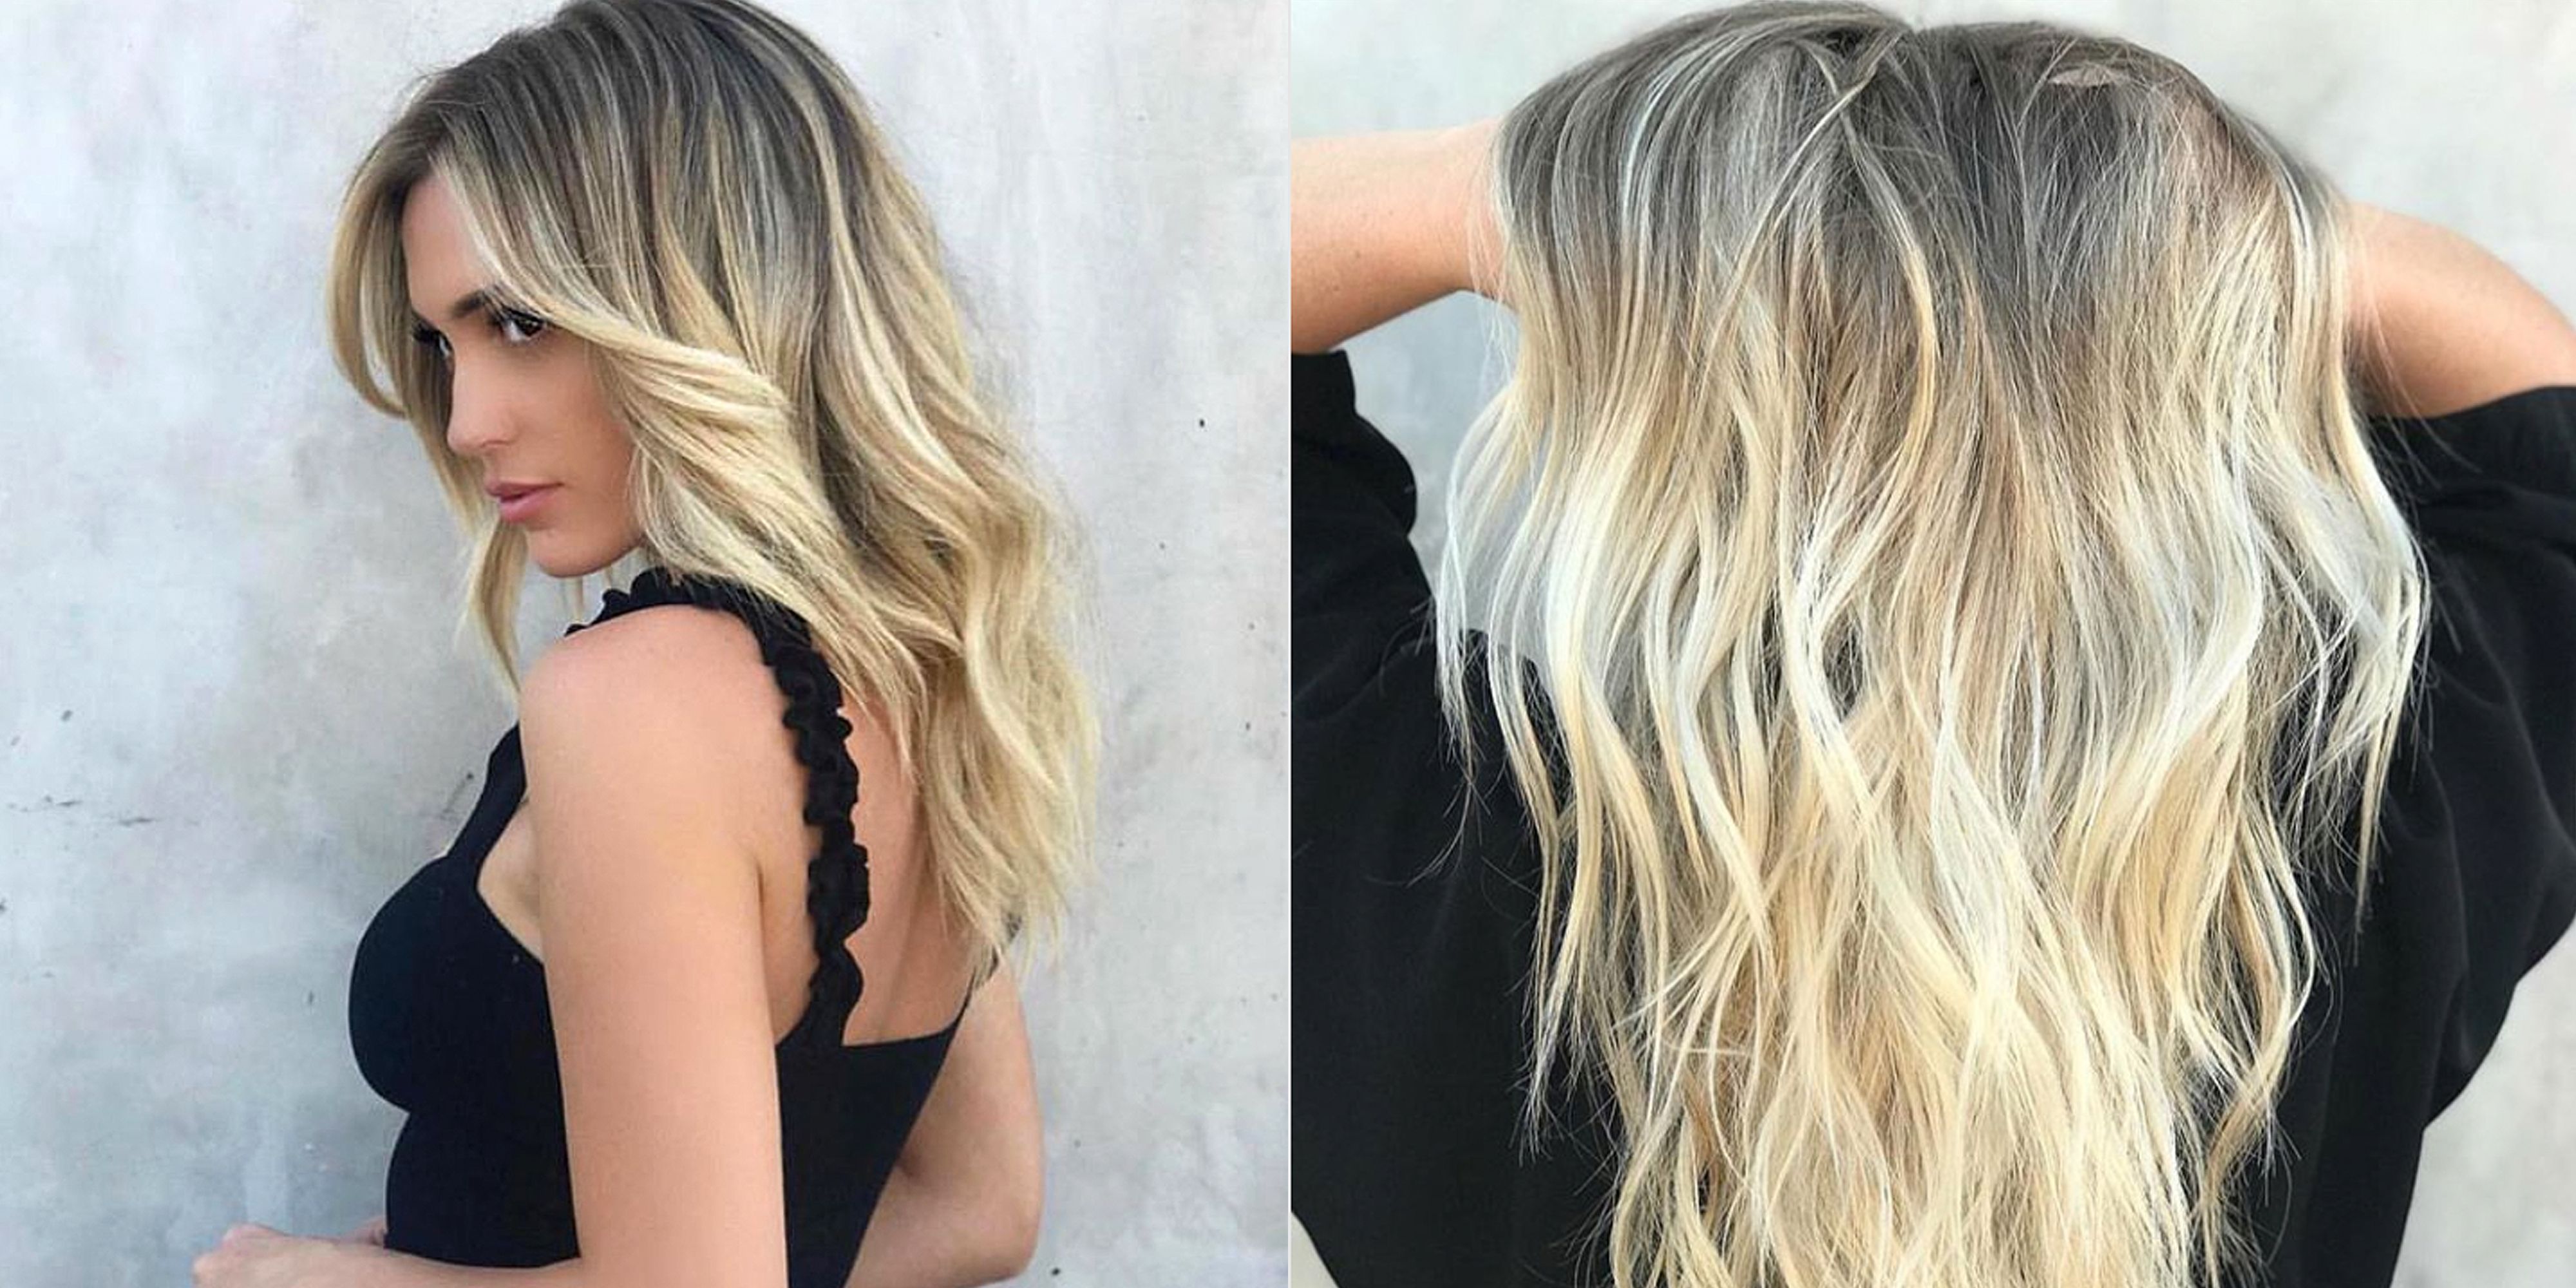 Balayage And Ombr Hair Color Techniques Explained What Are The